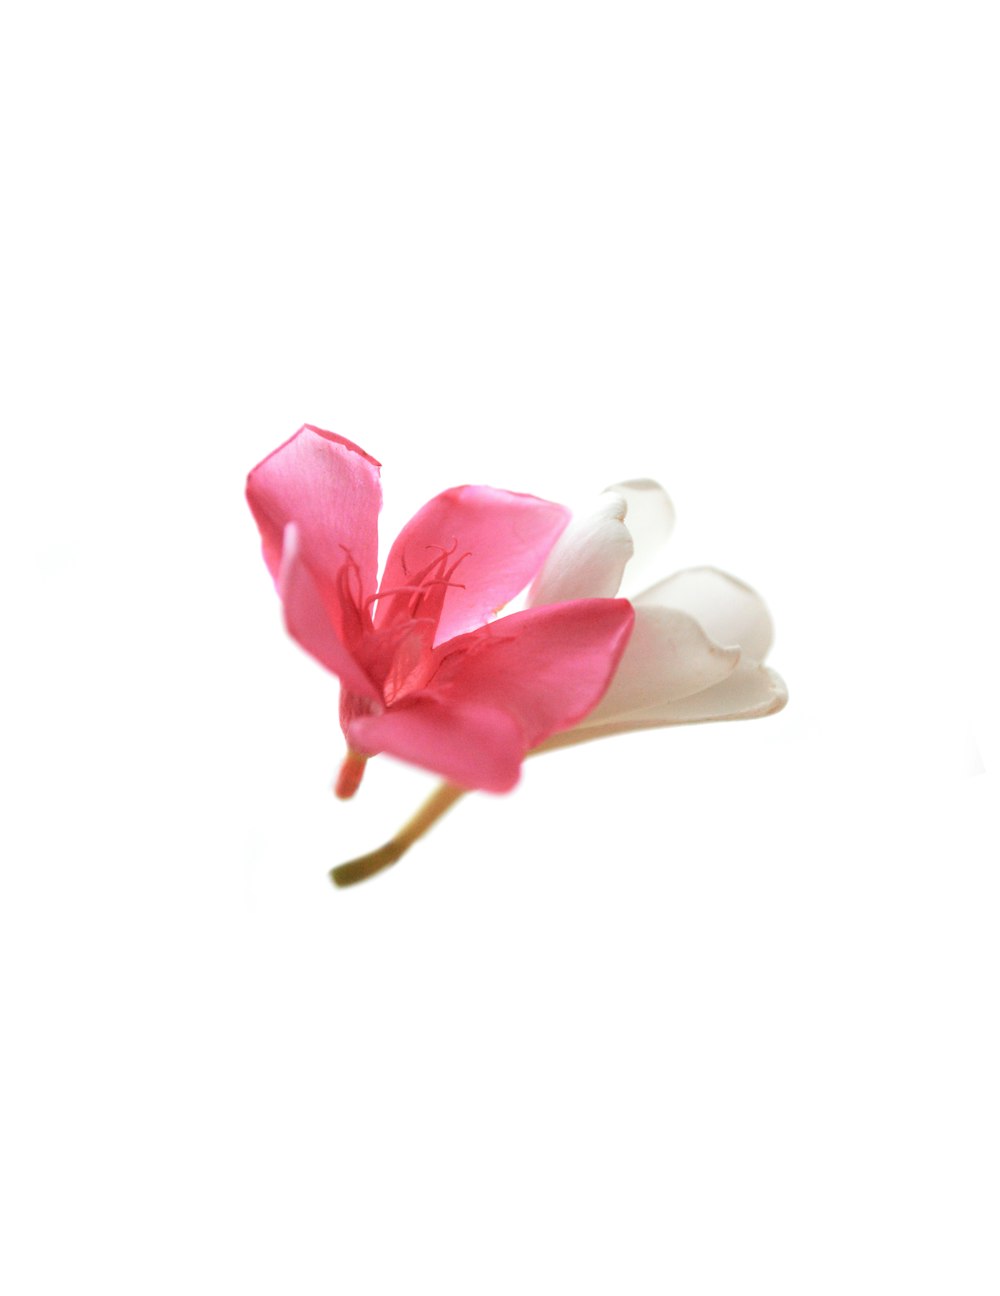 white and pink flower on white background